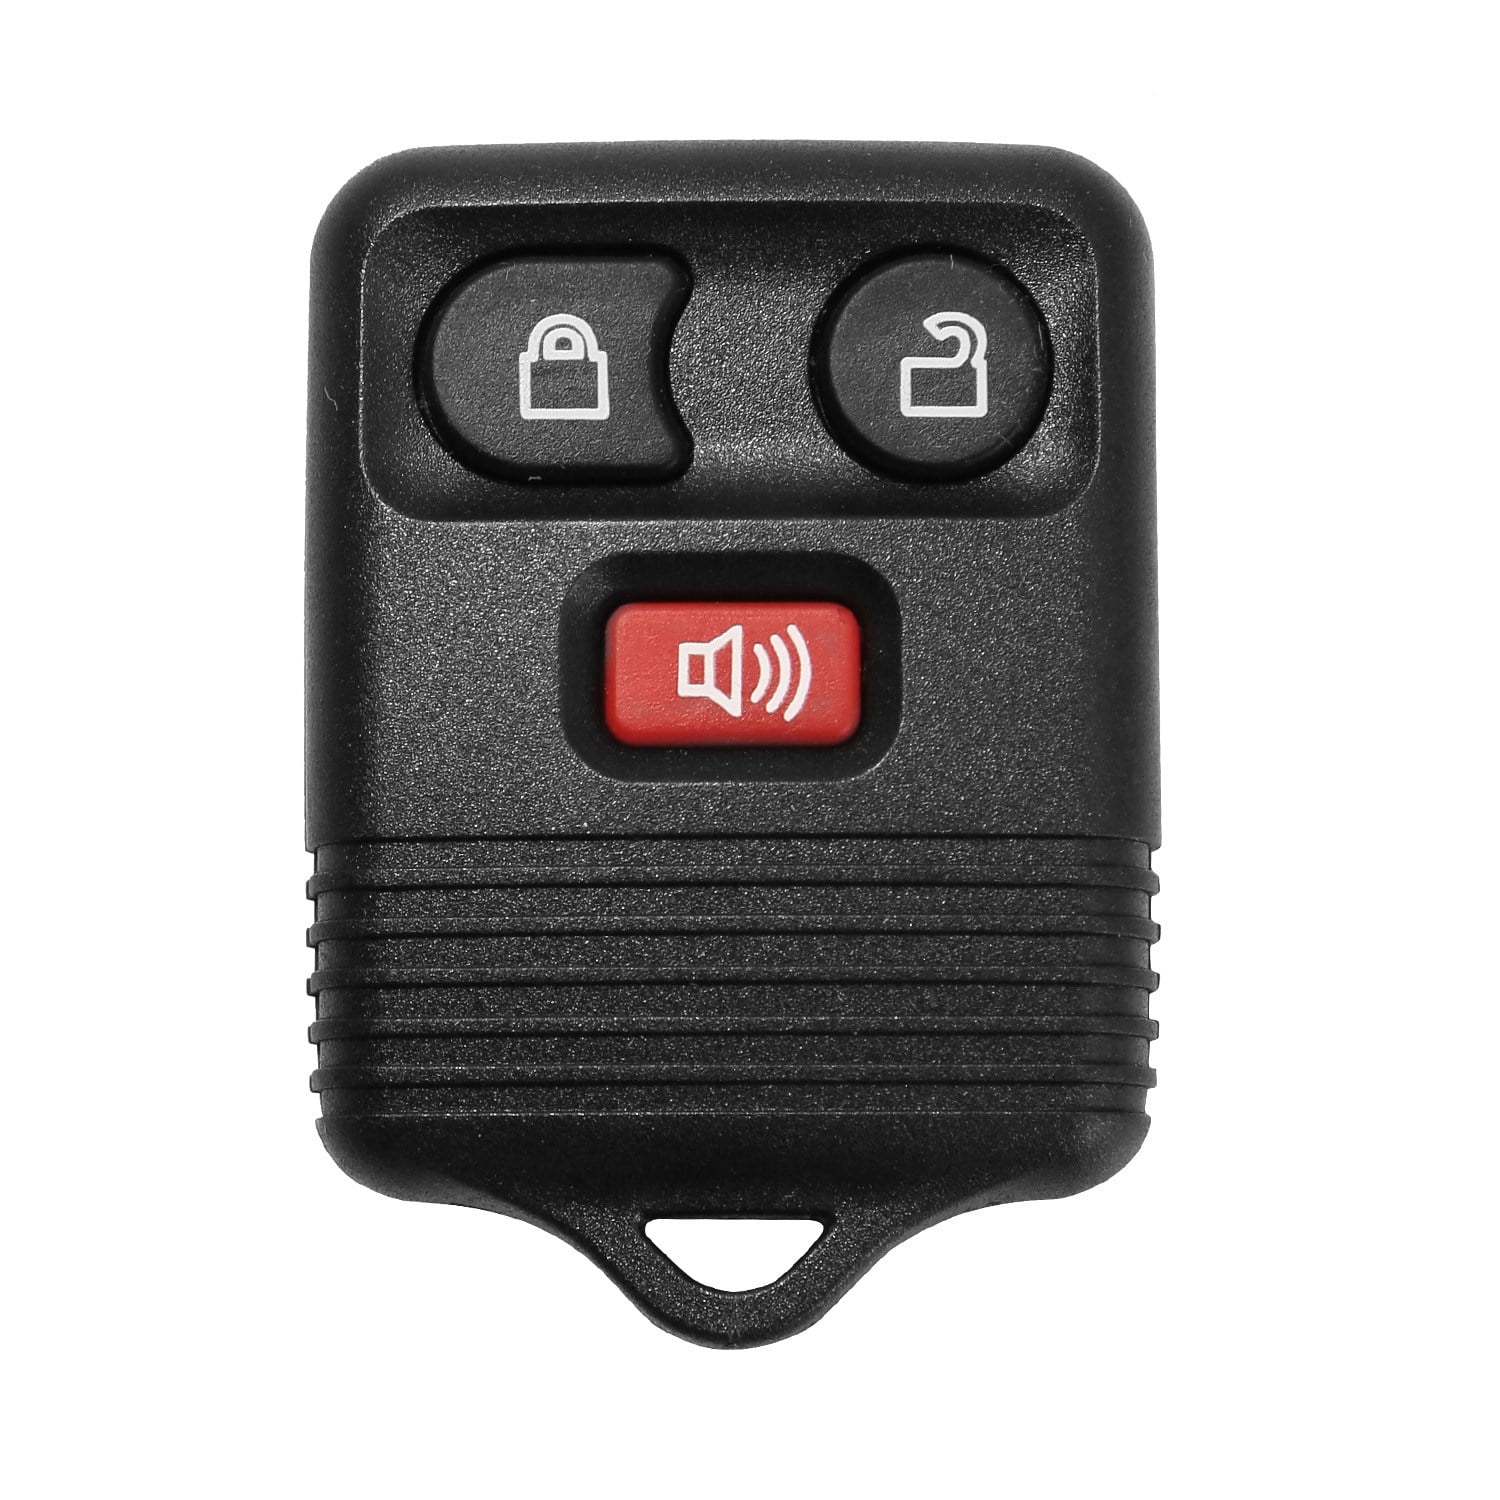 2 Replacement Keyless Entry Remote Key Fob Clicker Transmitter Control For Ford 